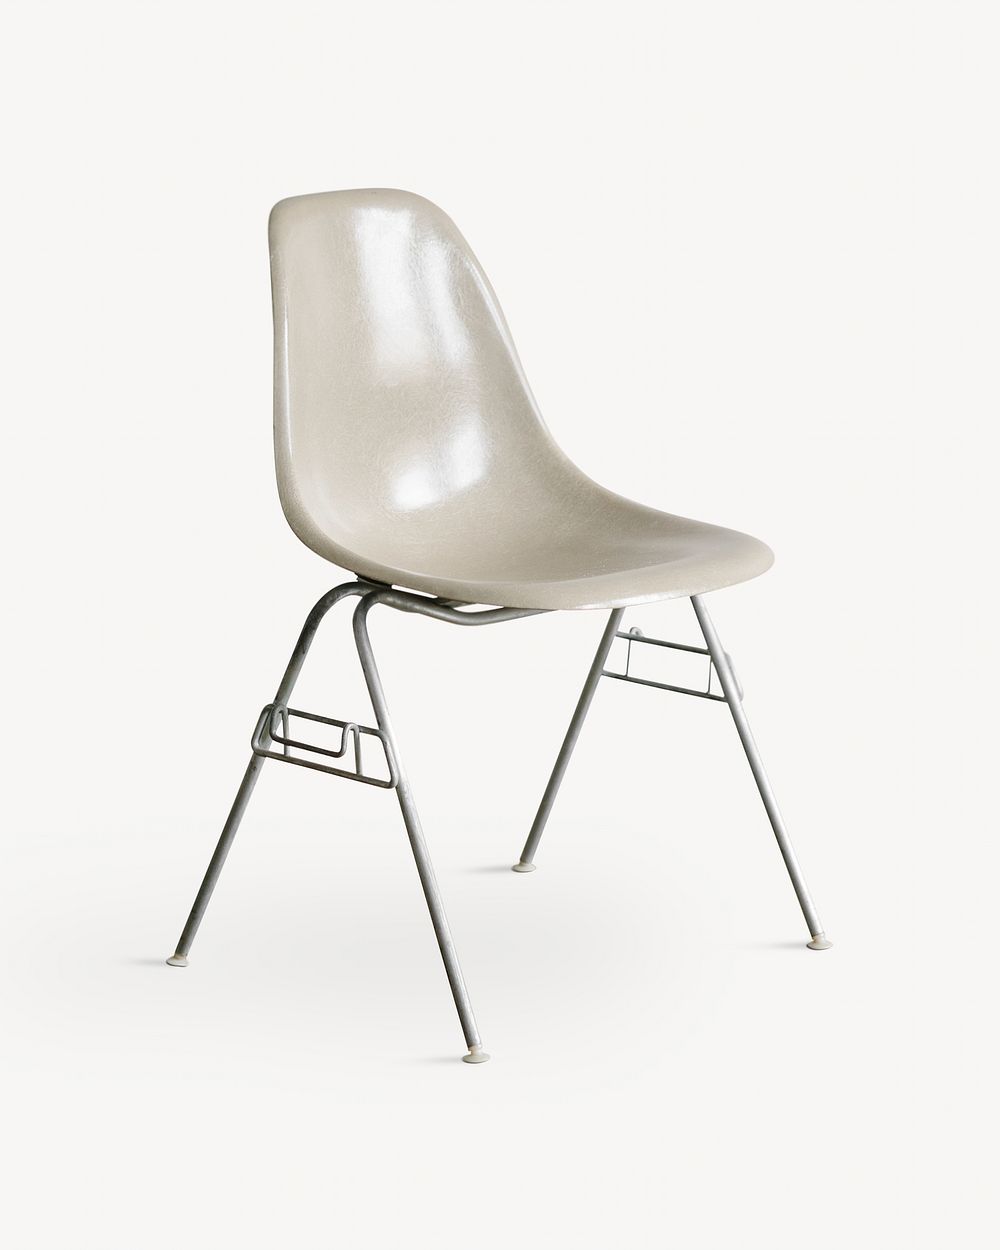 Retro chair isolated image